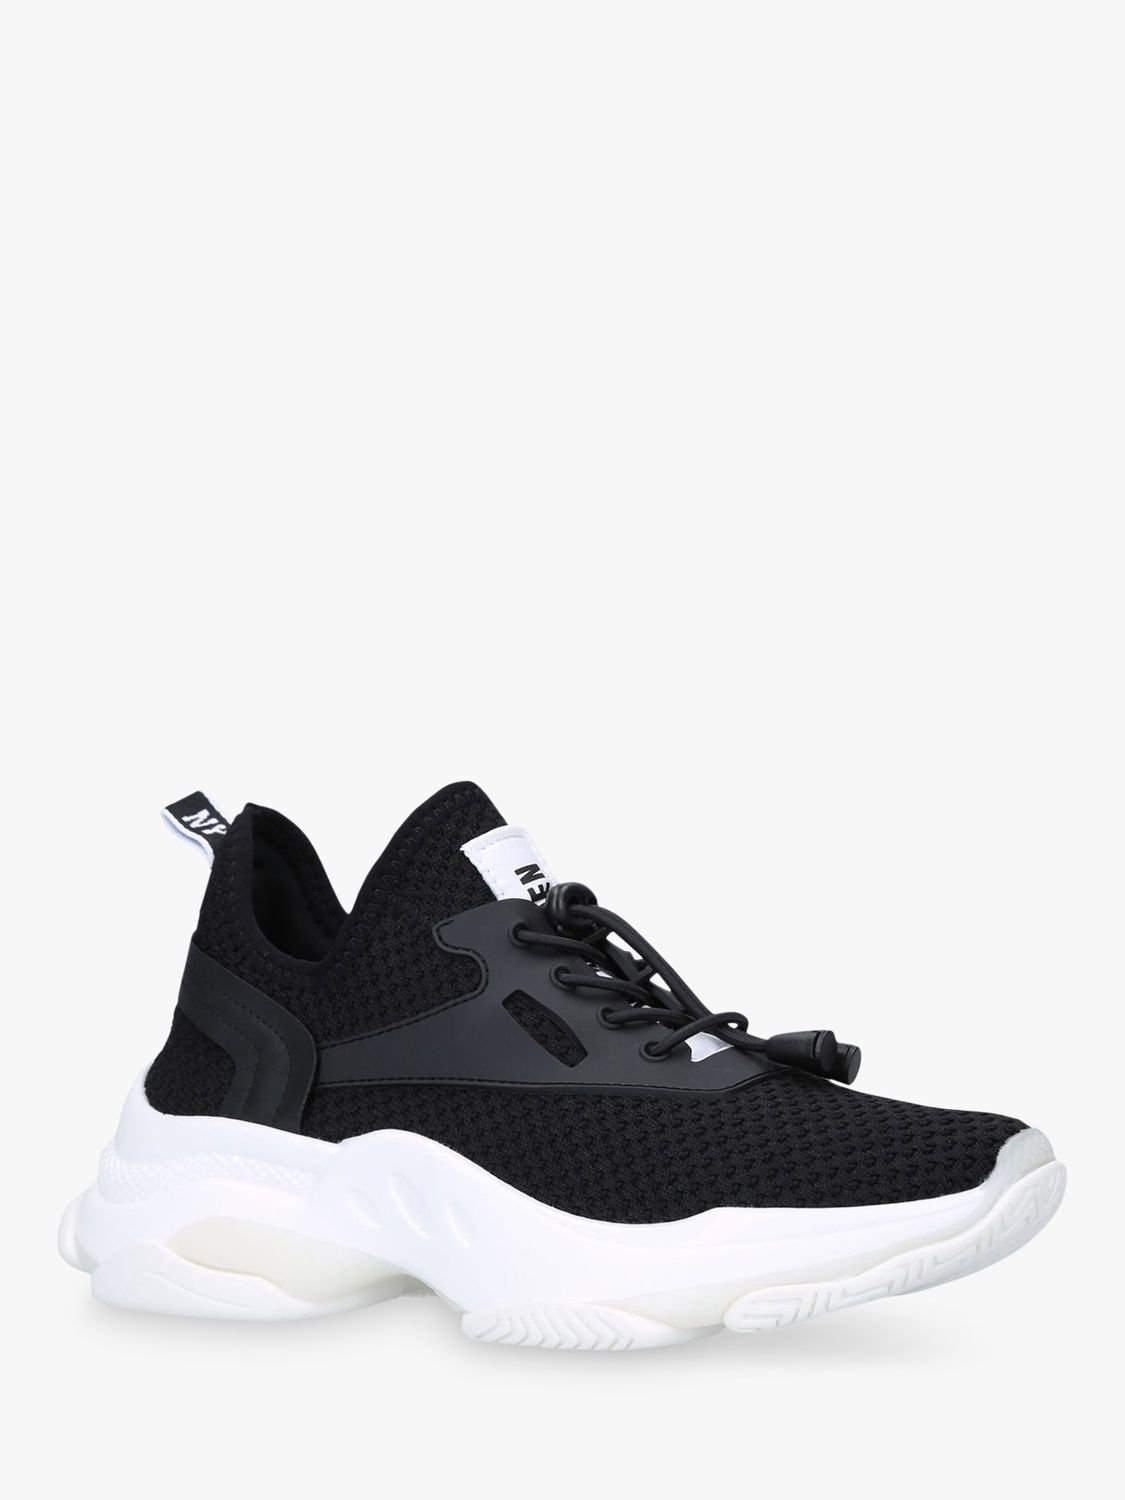 Steve Madden Match Chunky Trainers, Black at John Lewis & Partners